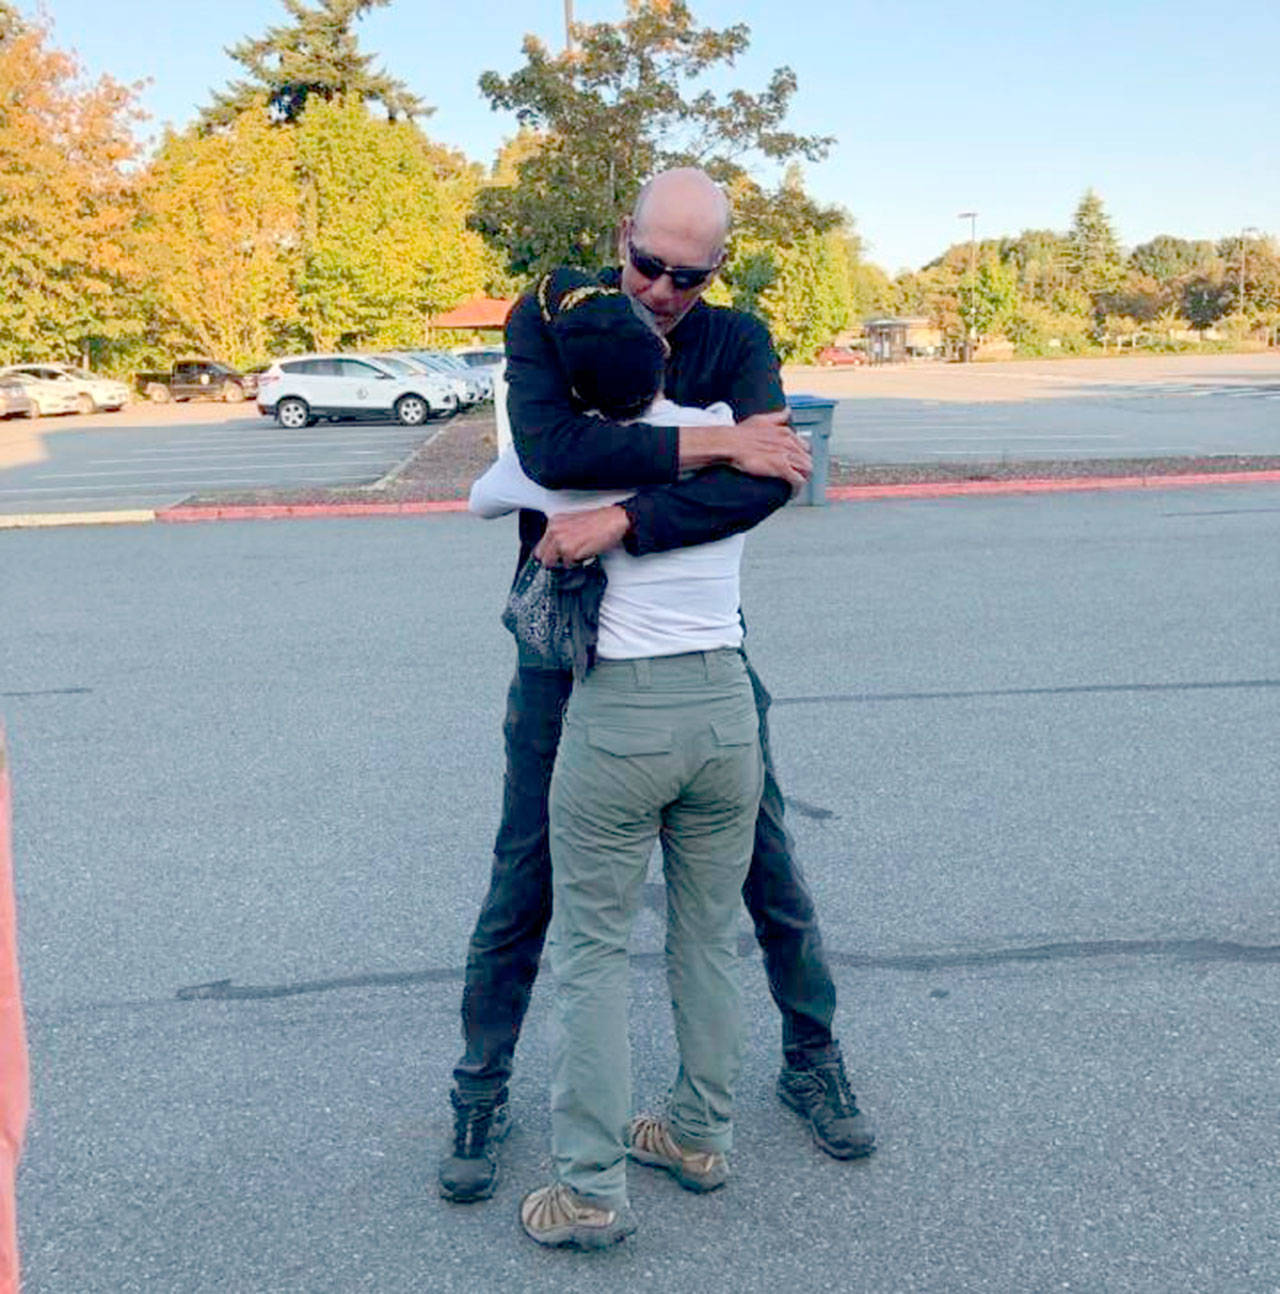 Rescued hiker Stephanie Lincoln embraces her husband Brad Rosenthal after the pair were reunited Monday evening following Lincoln’s 60-hour ordeal on federal wilderness land east of Forks.